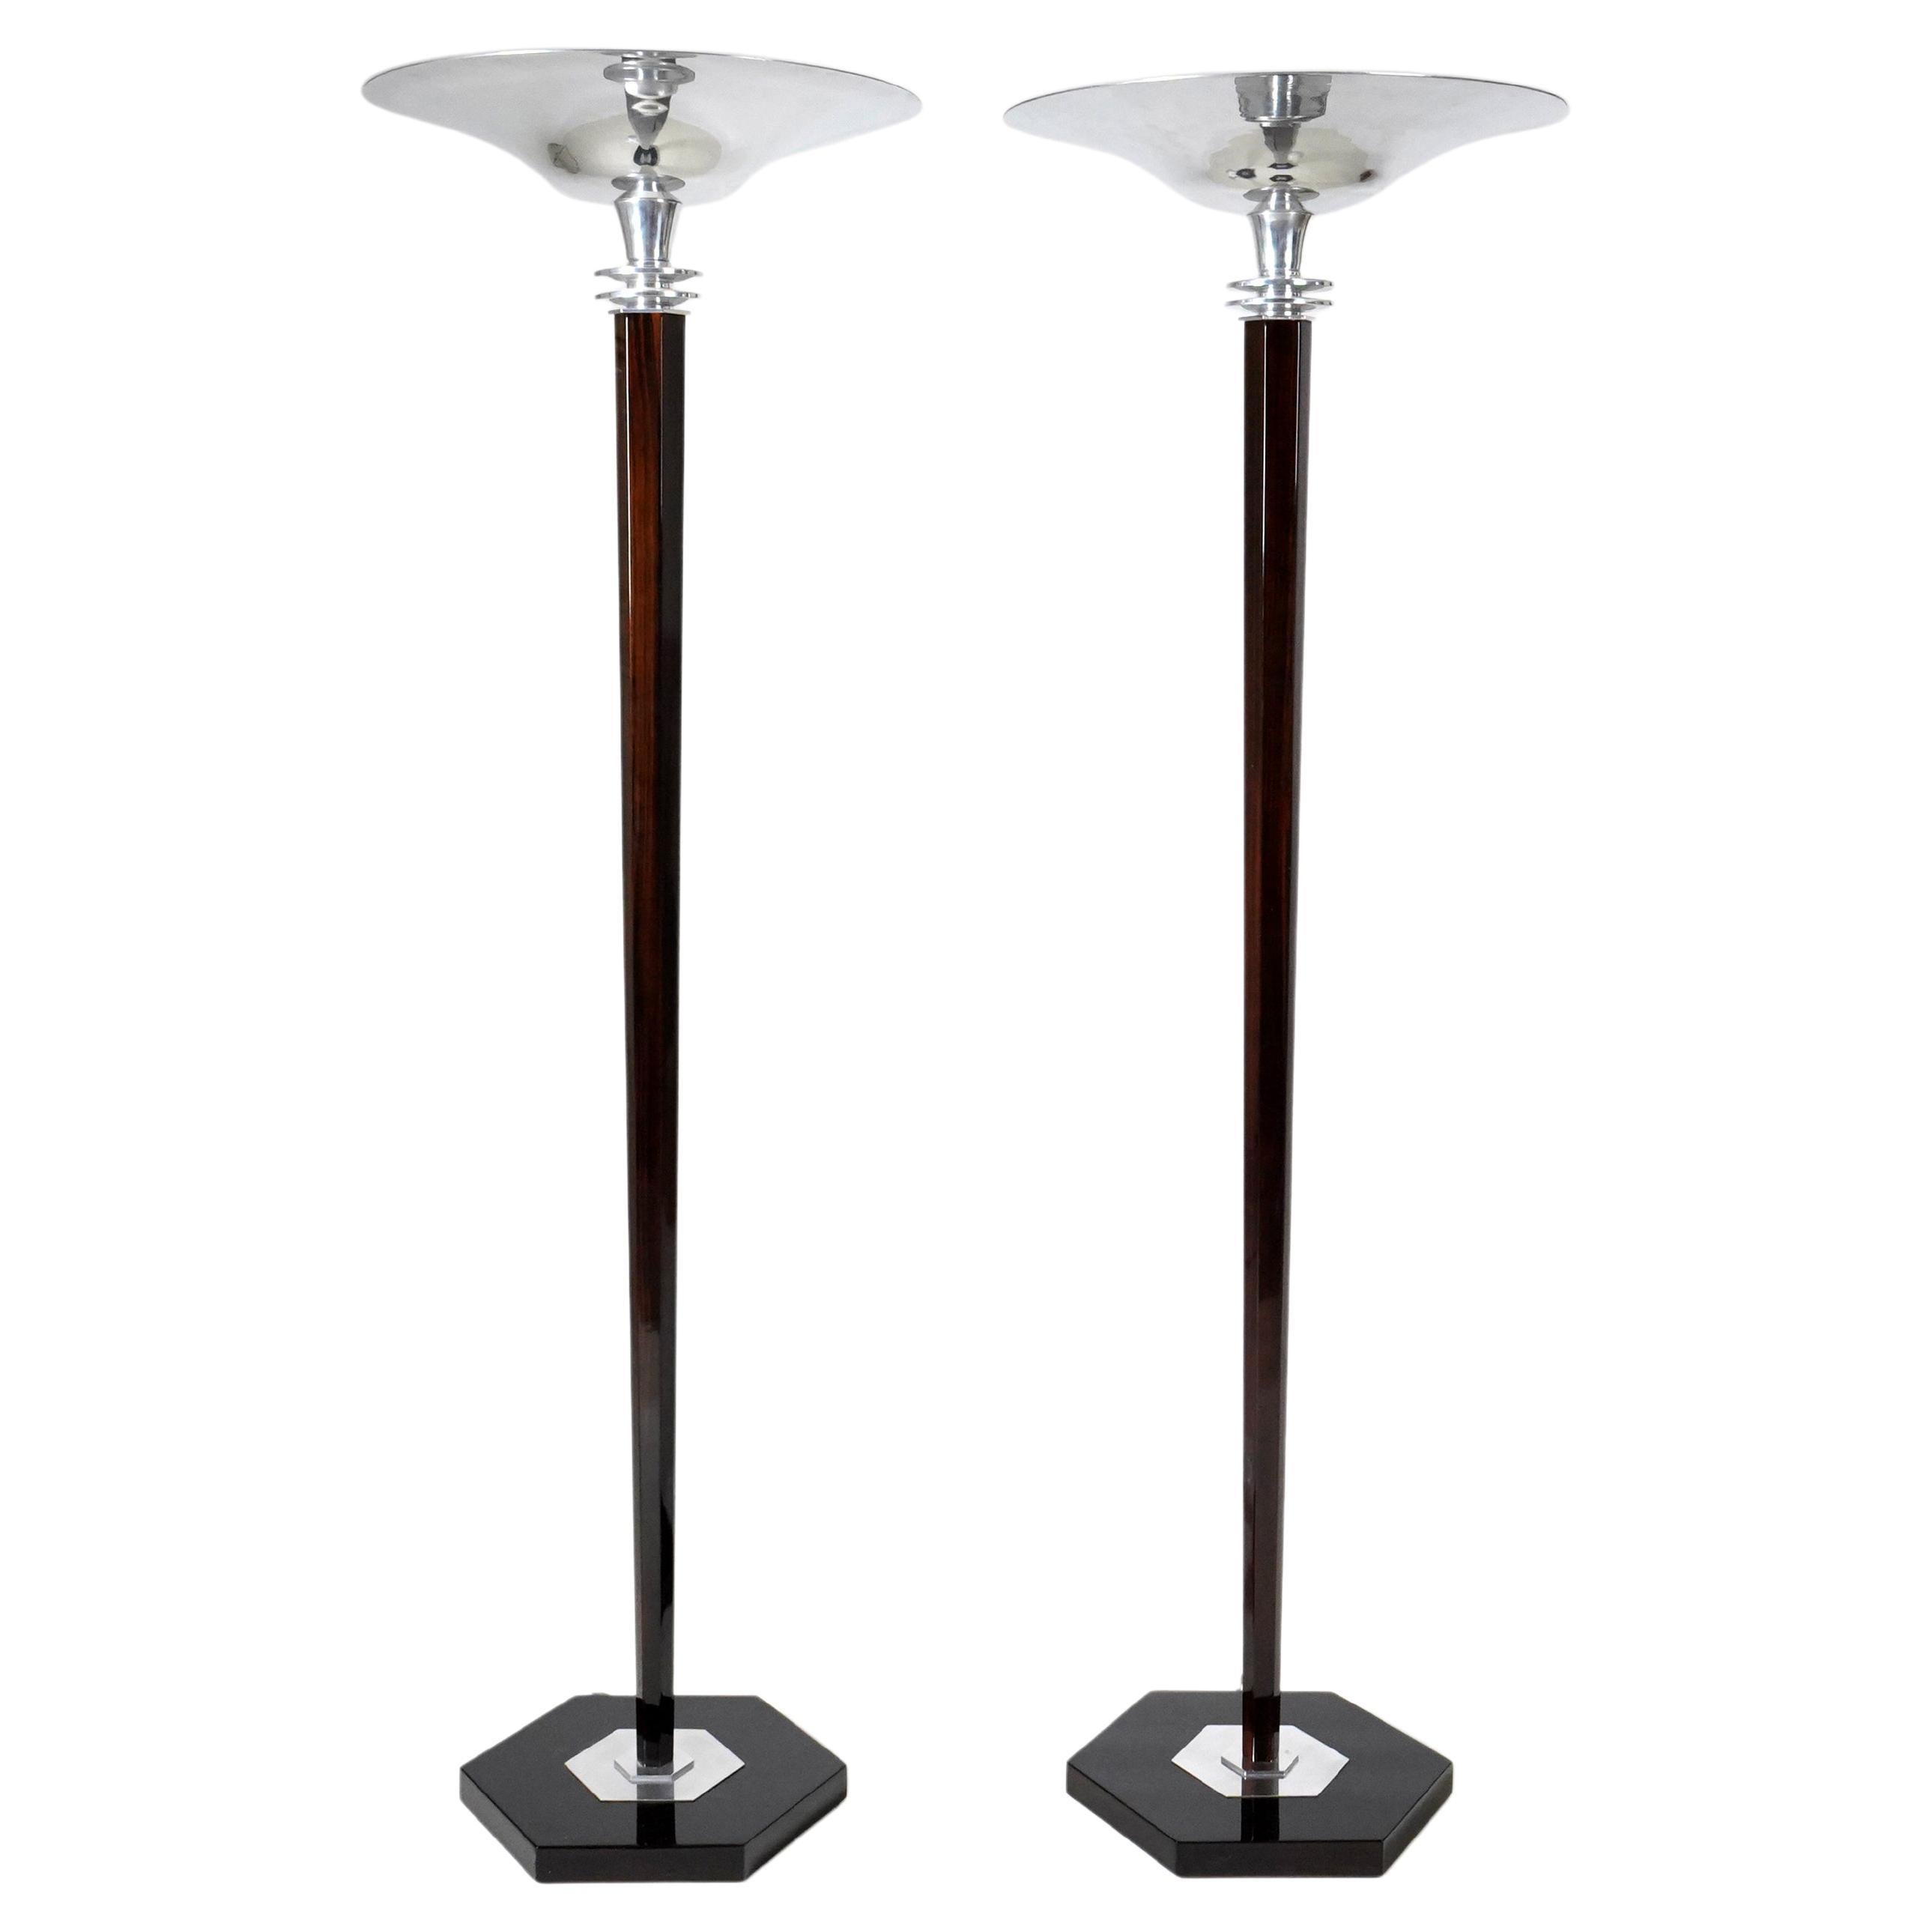 Pair of Art Deco Torchiers in Walnut and Nickel For Sale